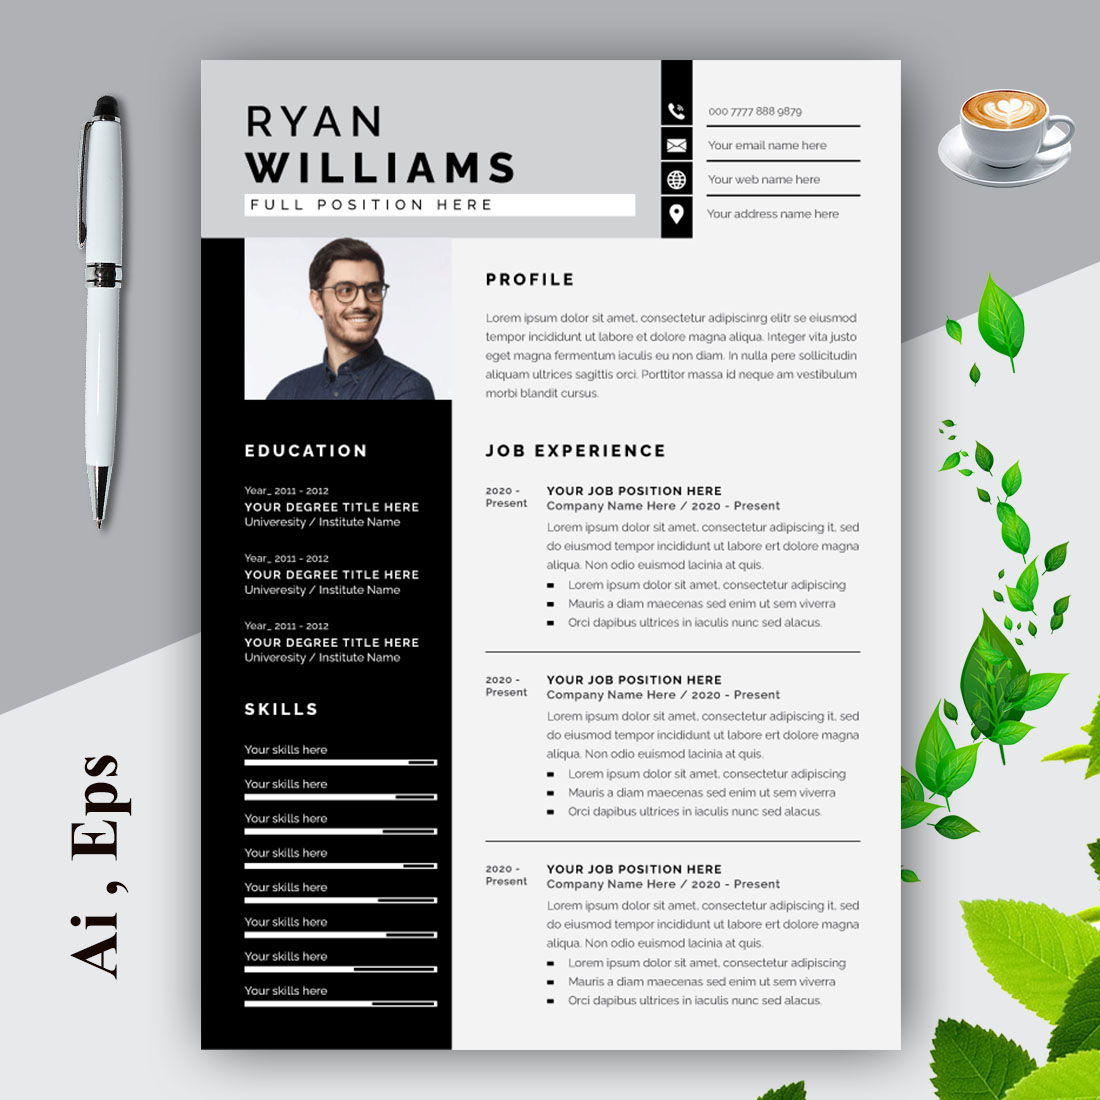 Minimal Resume Design Template with Black Color cover image.